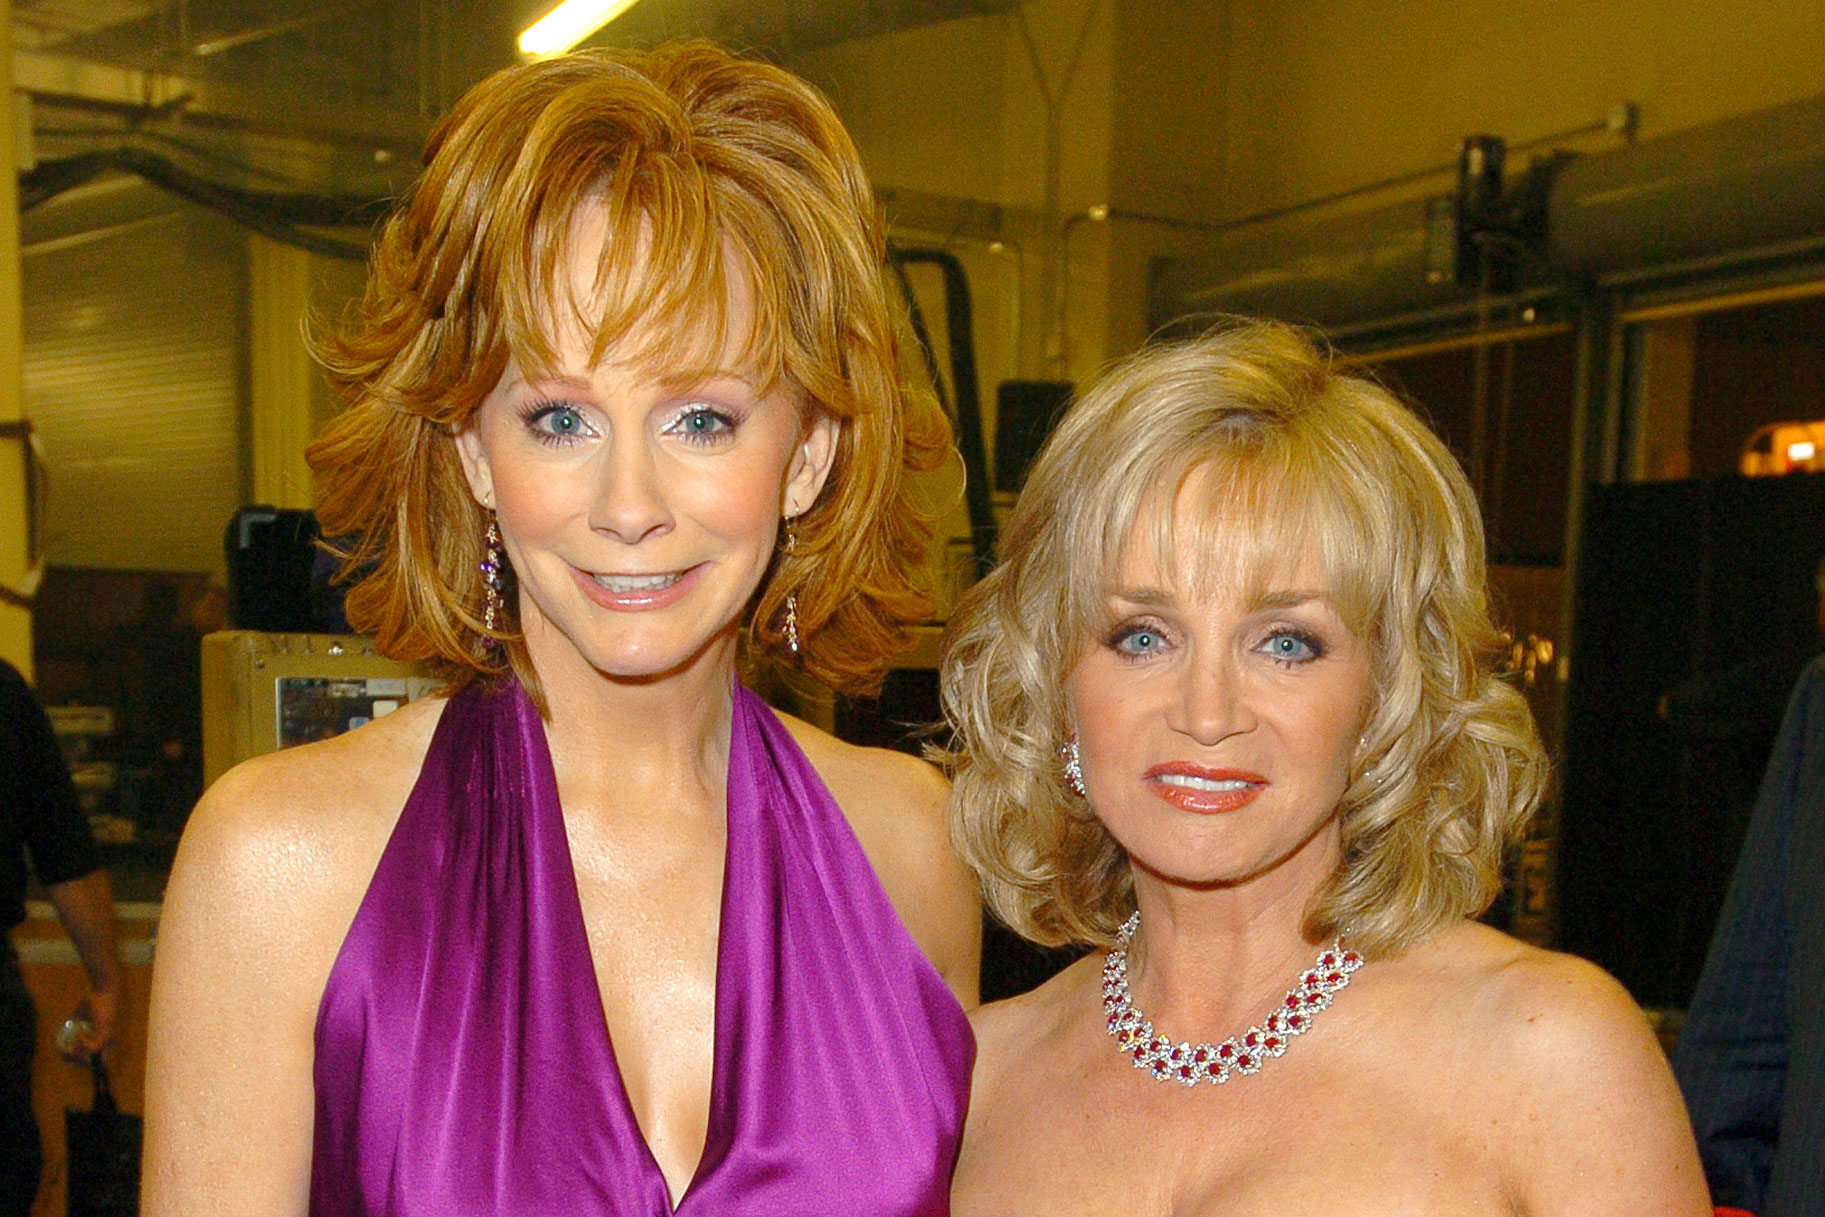 “When Country Wasn’t Cool” by Reba McEntire and Barbara Mandrell